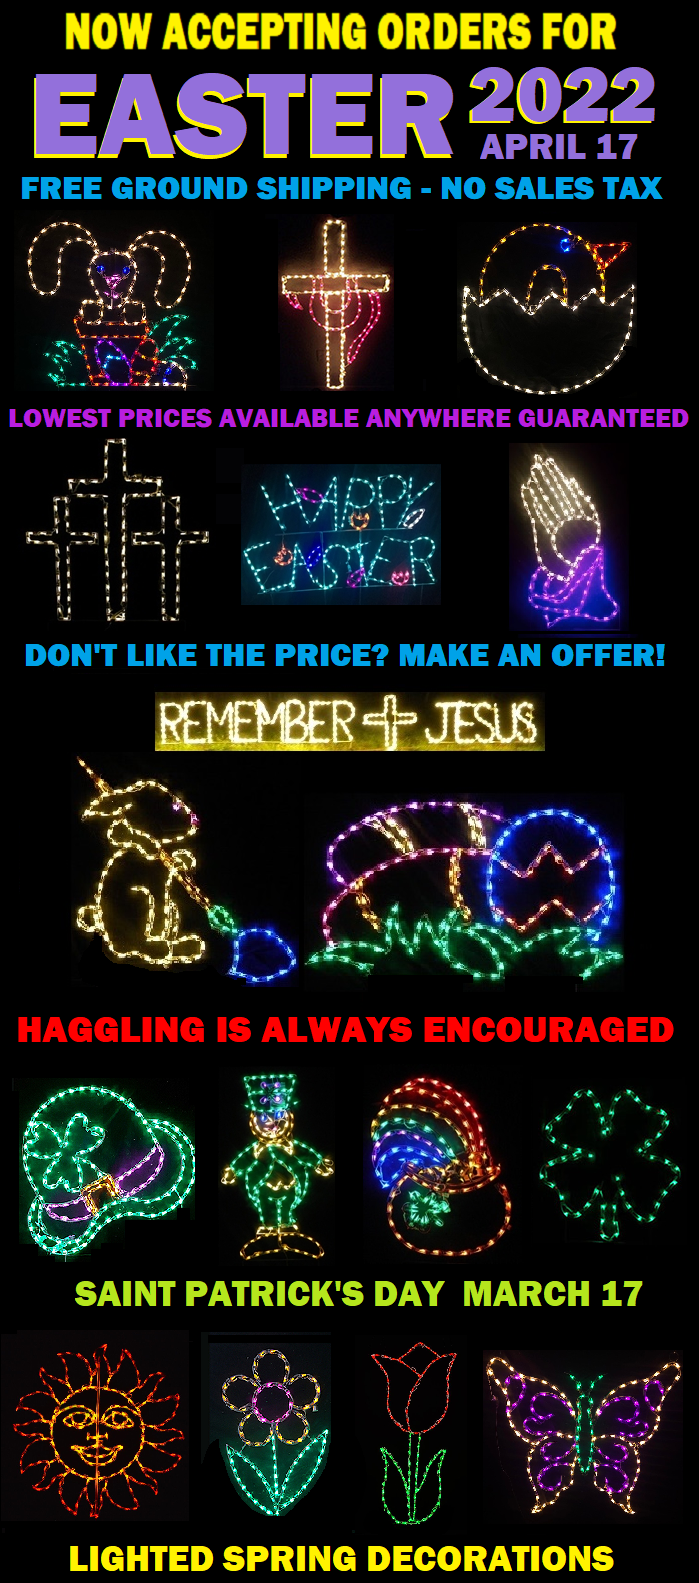 Order Your Easter & St Patrick’s Day Outdoor Lighted Decorations Now